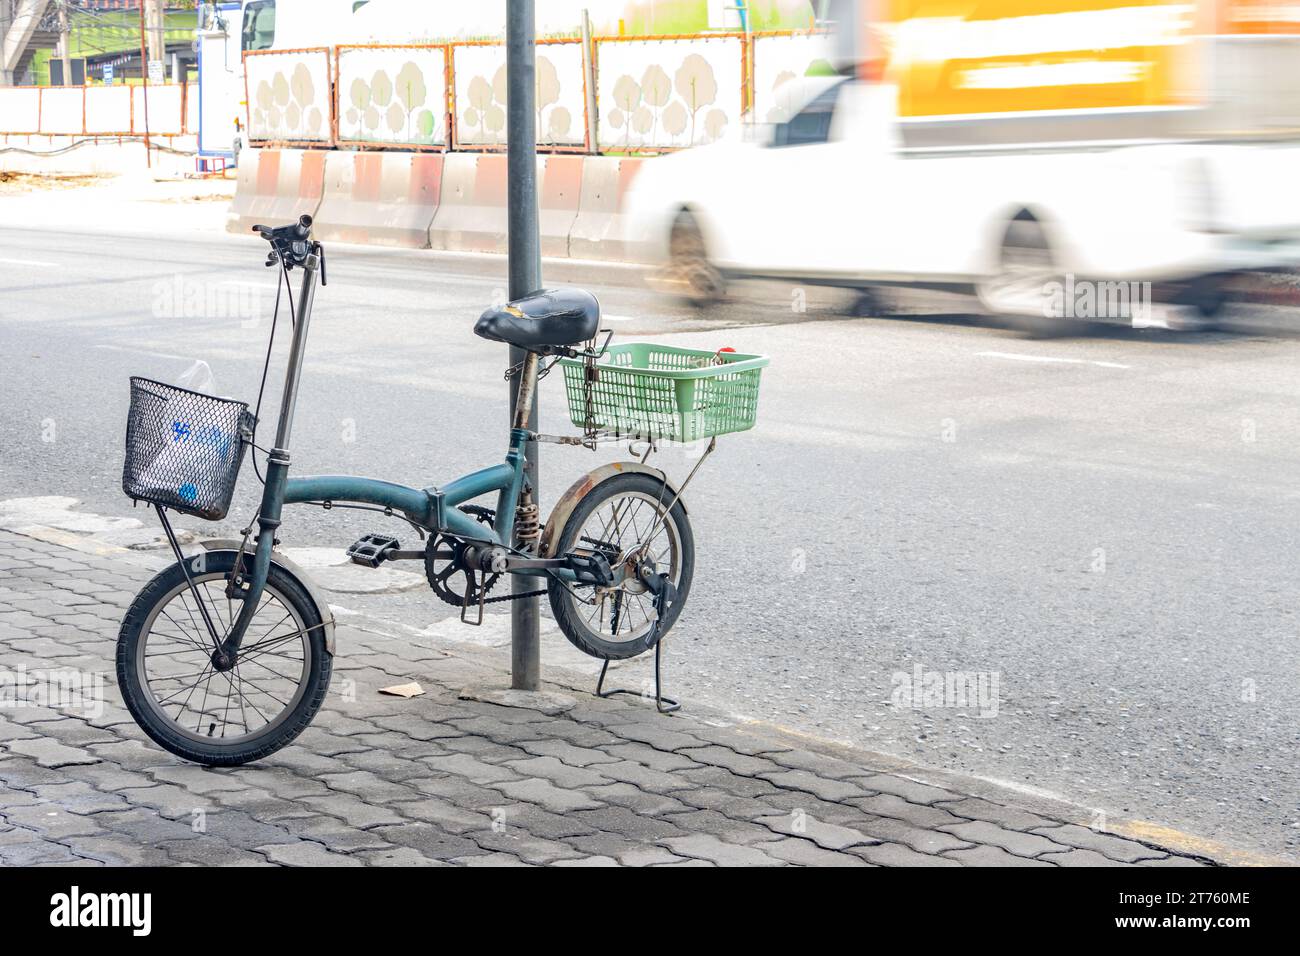 The bicycle parked on a kickstand on the sidewalk next to a busy road, Bangkok, Thailand Stock Photo